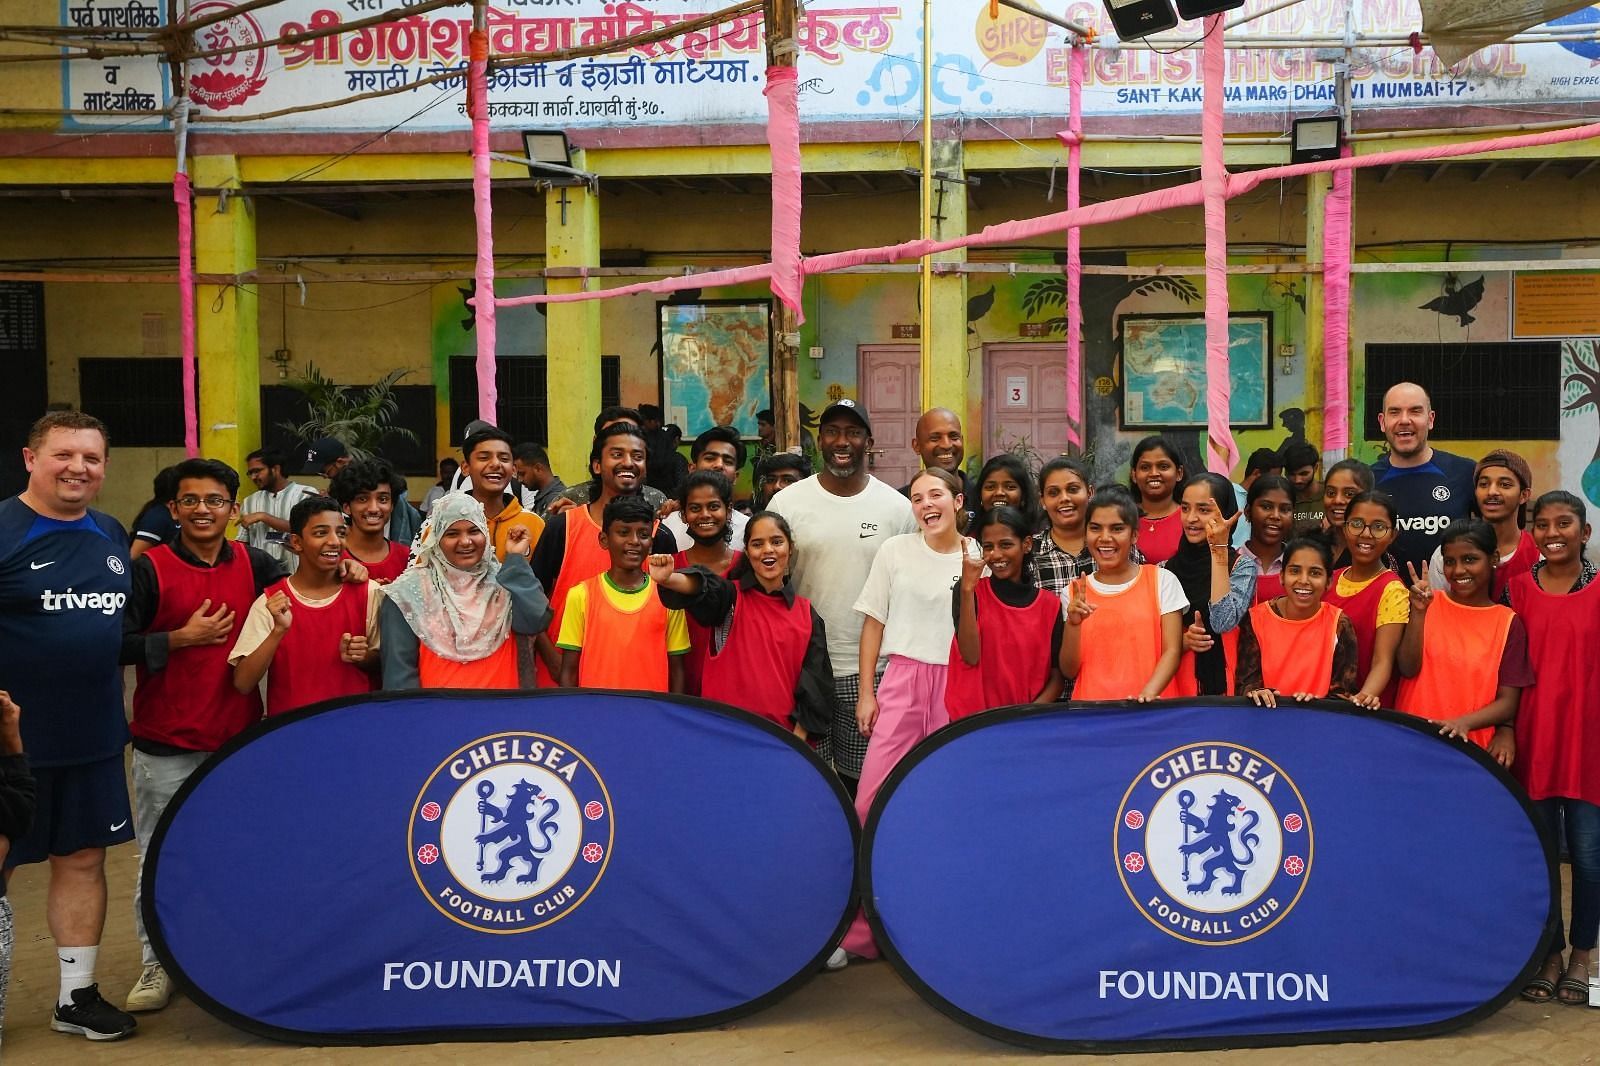 Jimmy Floyd Hasselbaink with kids for the coaching clinic event in Dharavi Source : Business of Sports SportsKeeda